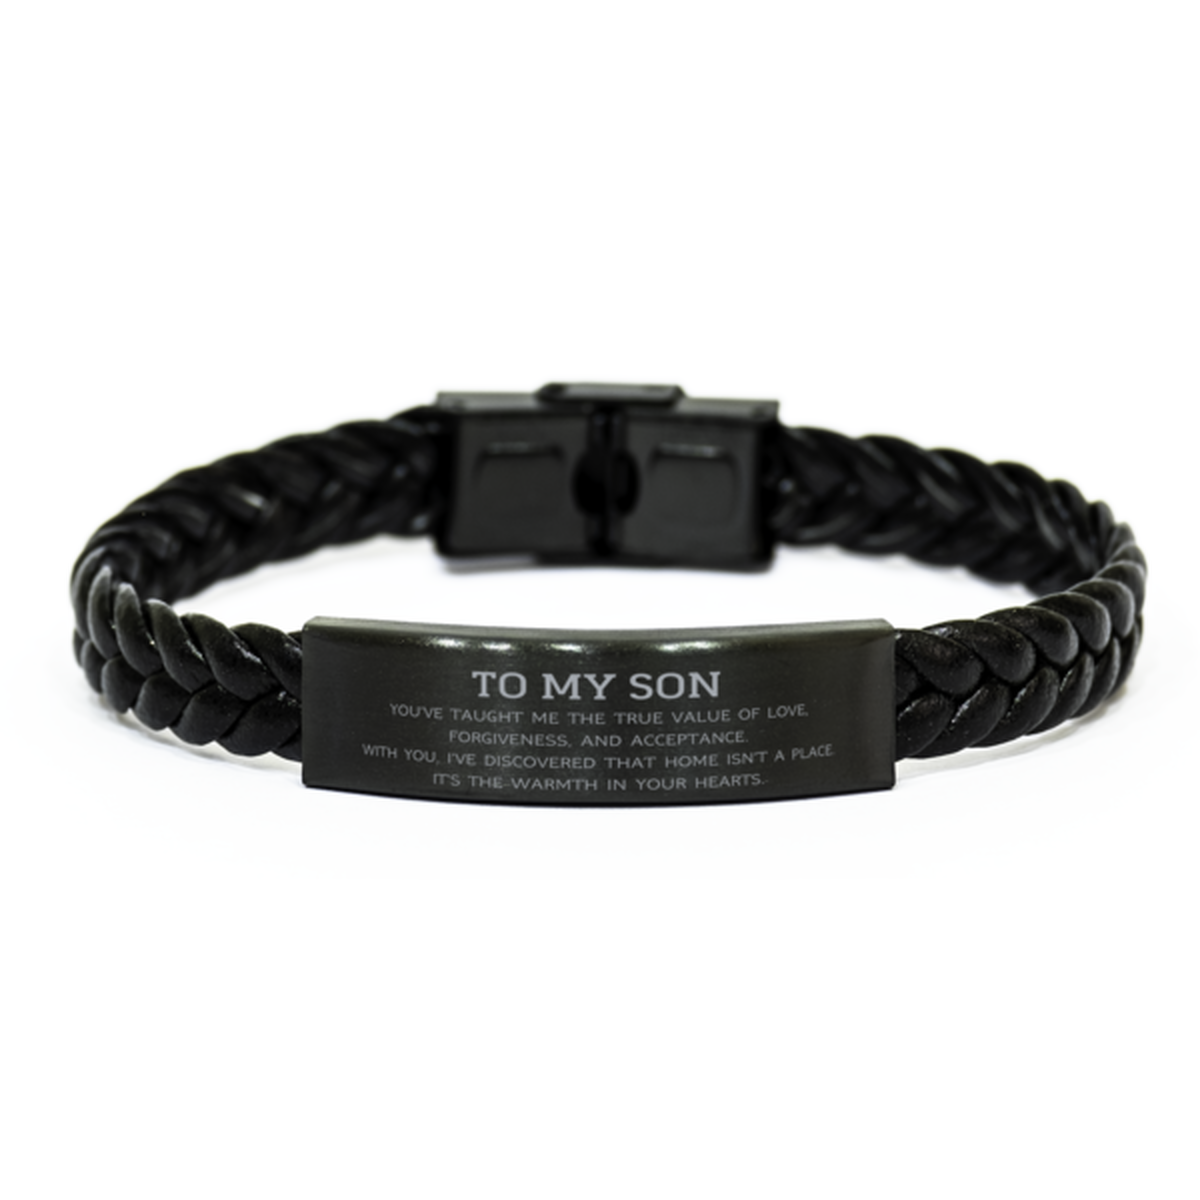 To My Son Gifts, You've taught me the true value of love, Thank You Gifts For Son, Birthday Braided Leather Bracelet For Son